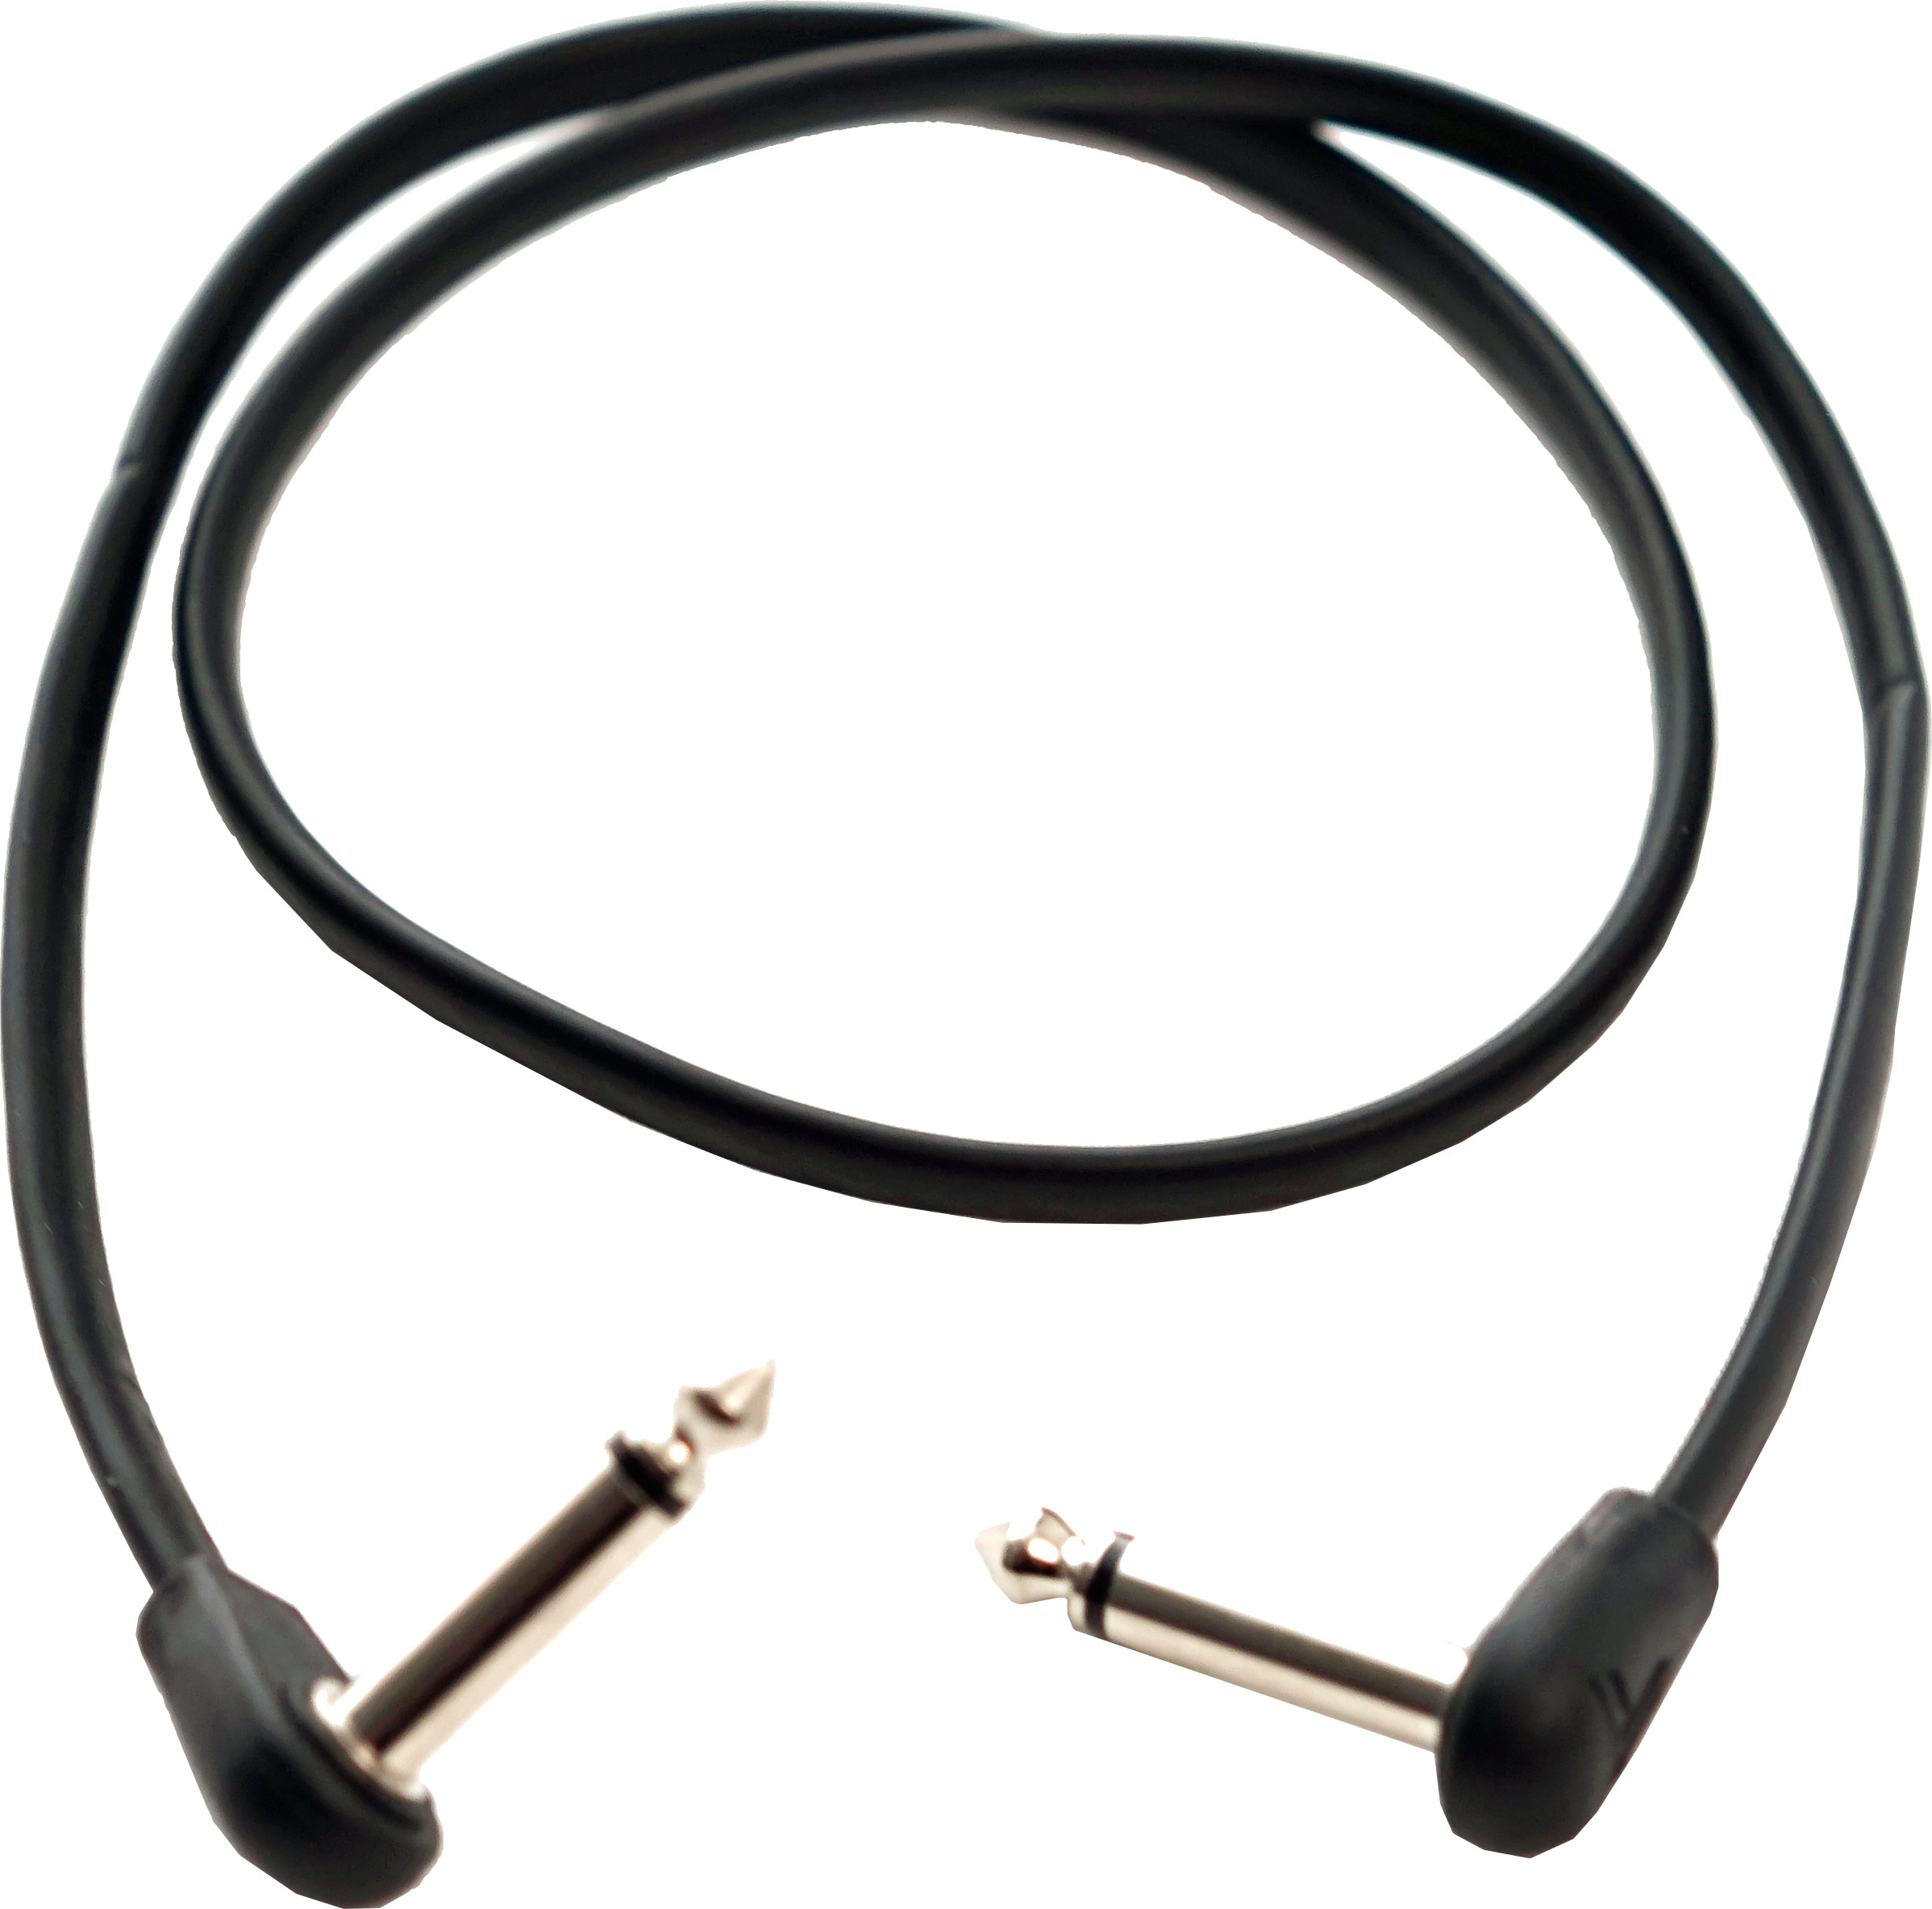 An image of Guitar Patch Cable - TourTech Flat Right Angled Patch Cable, 60cm | PMT Online